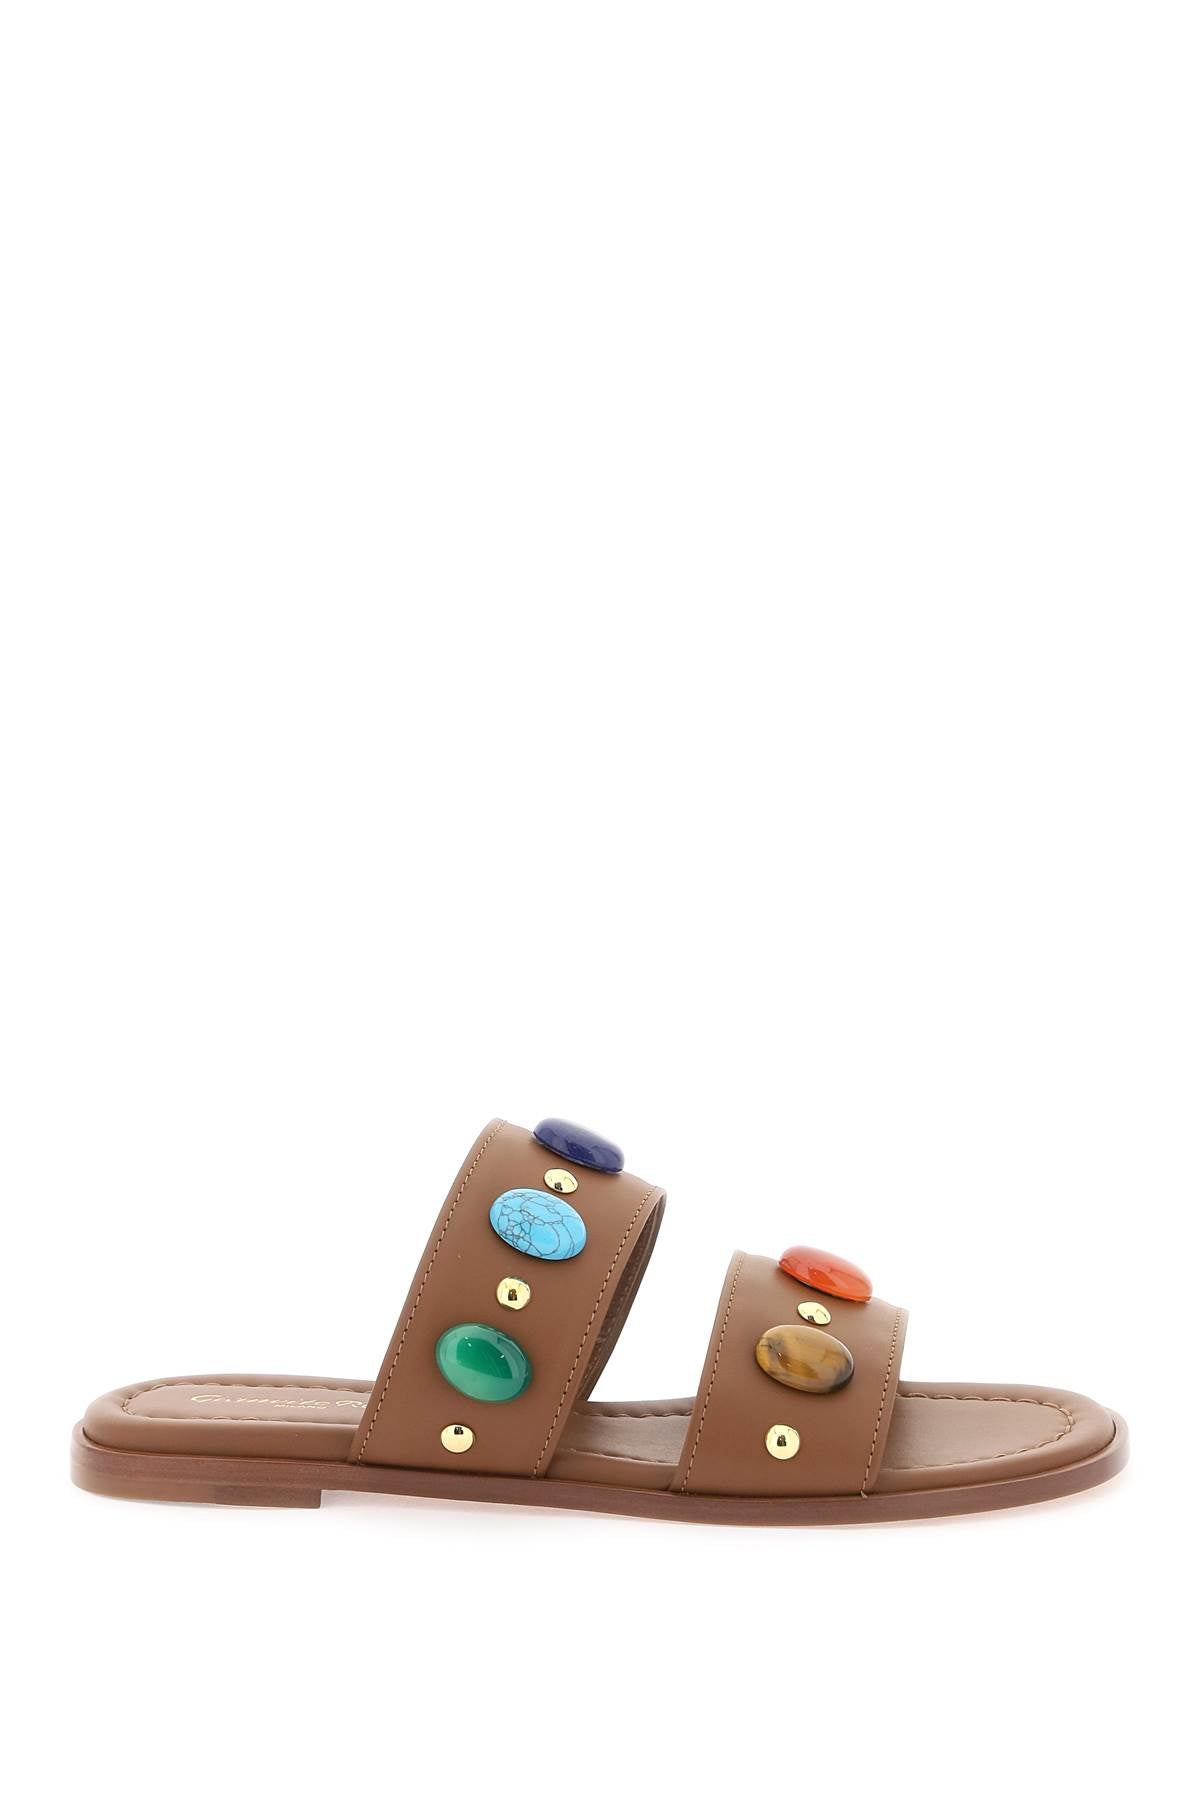 GIANVITO ROSSI Brown Slide Sandals with Natural Stone Embellishments for Women